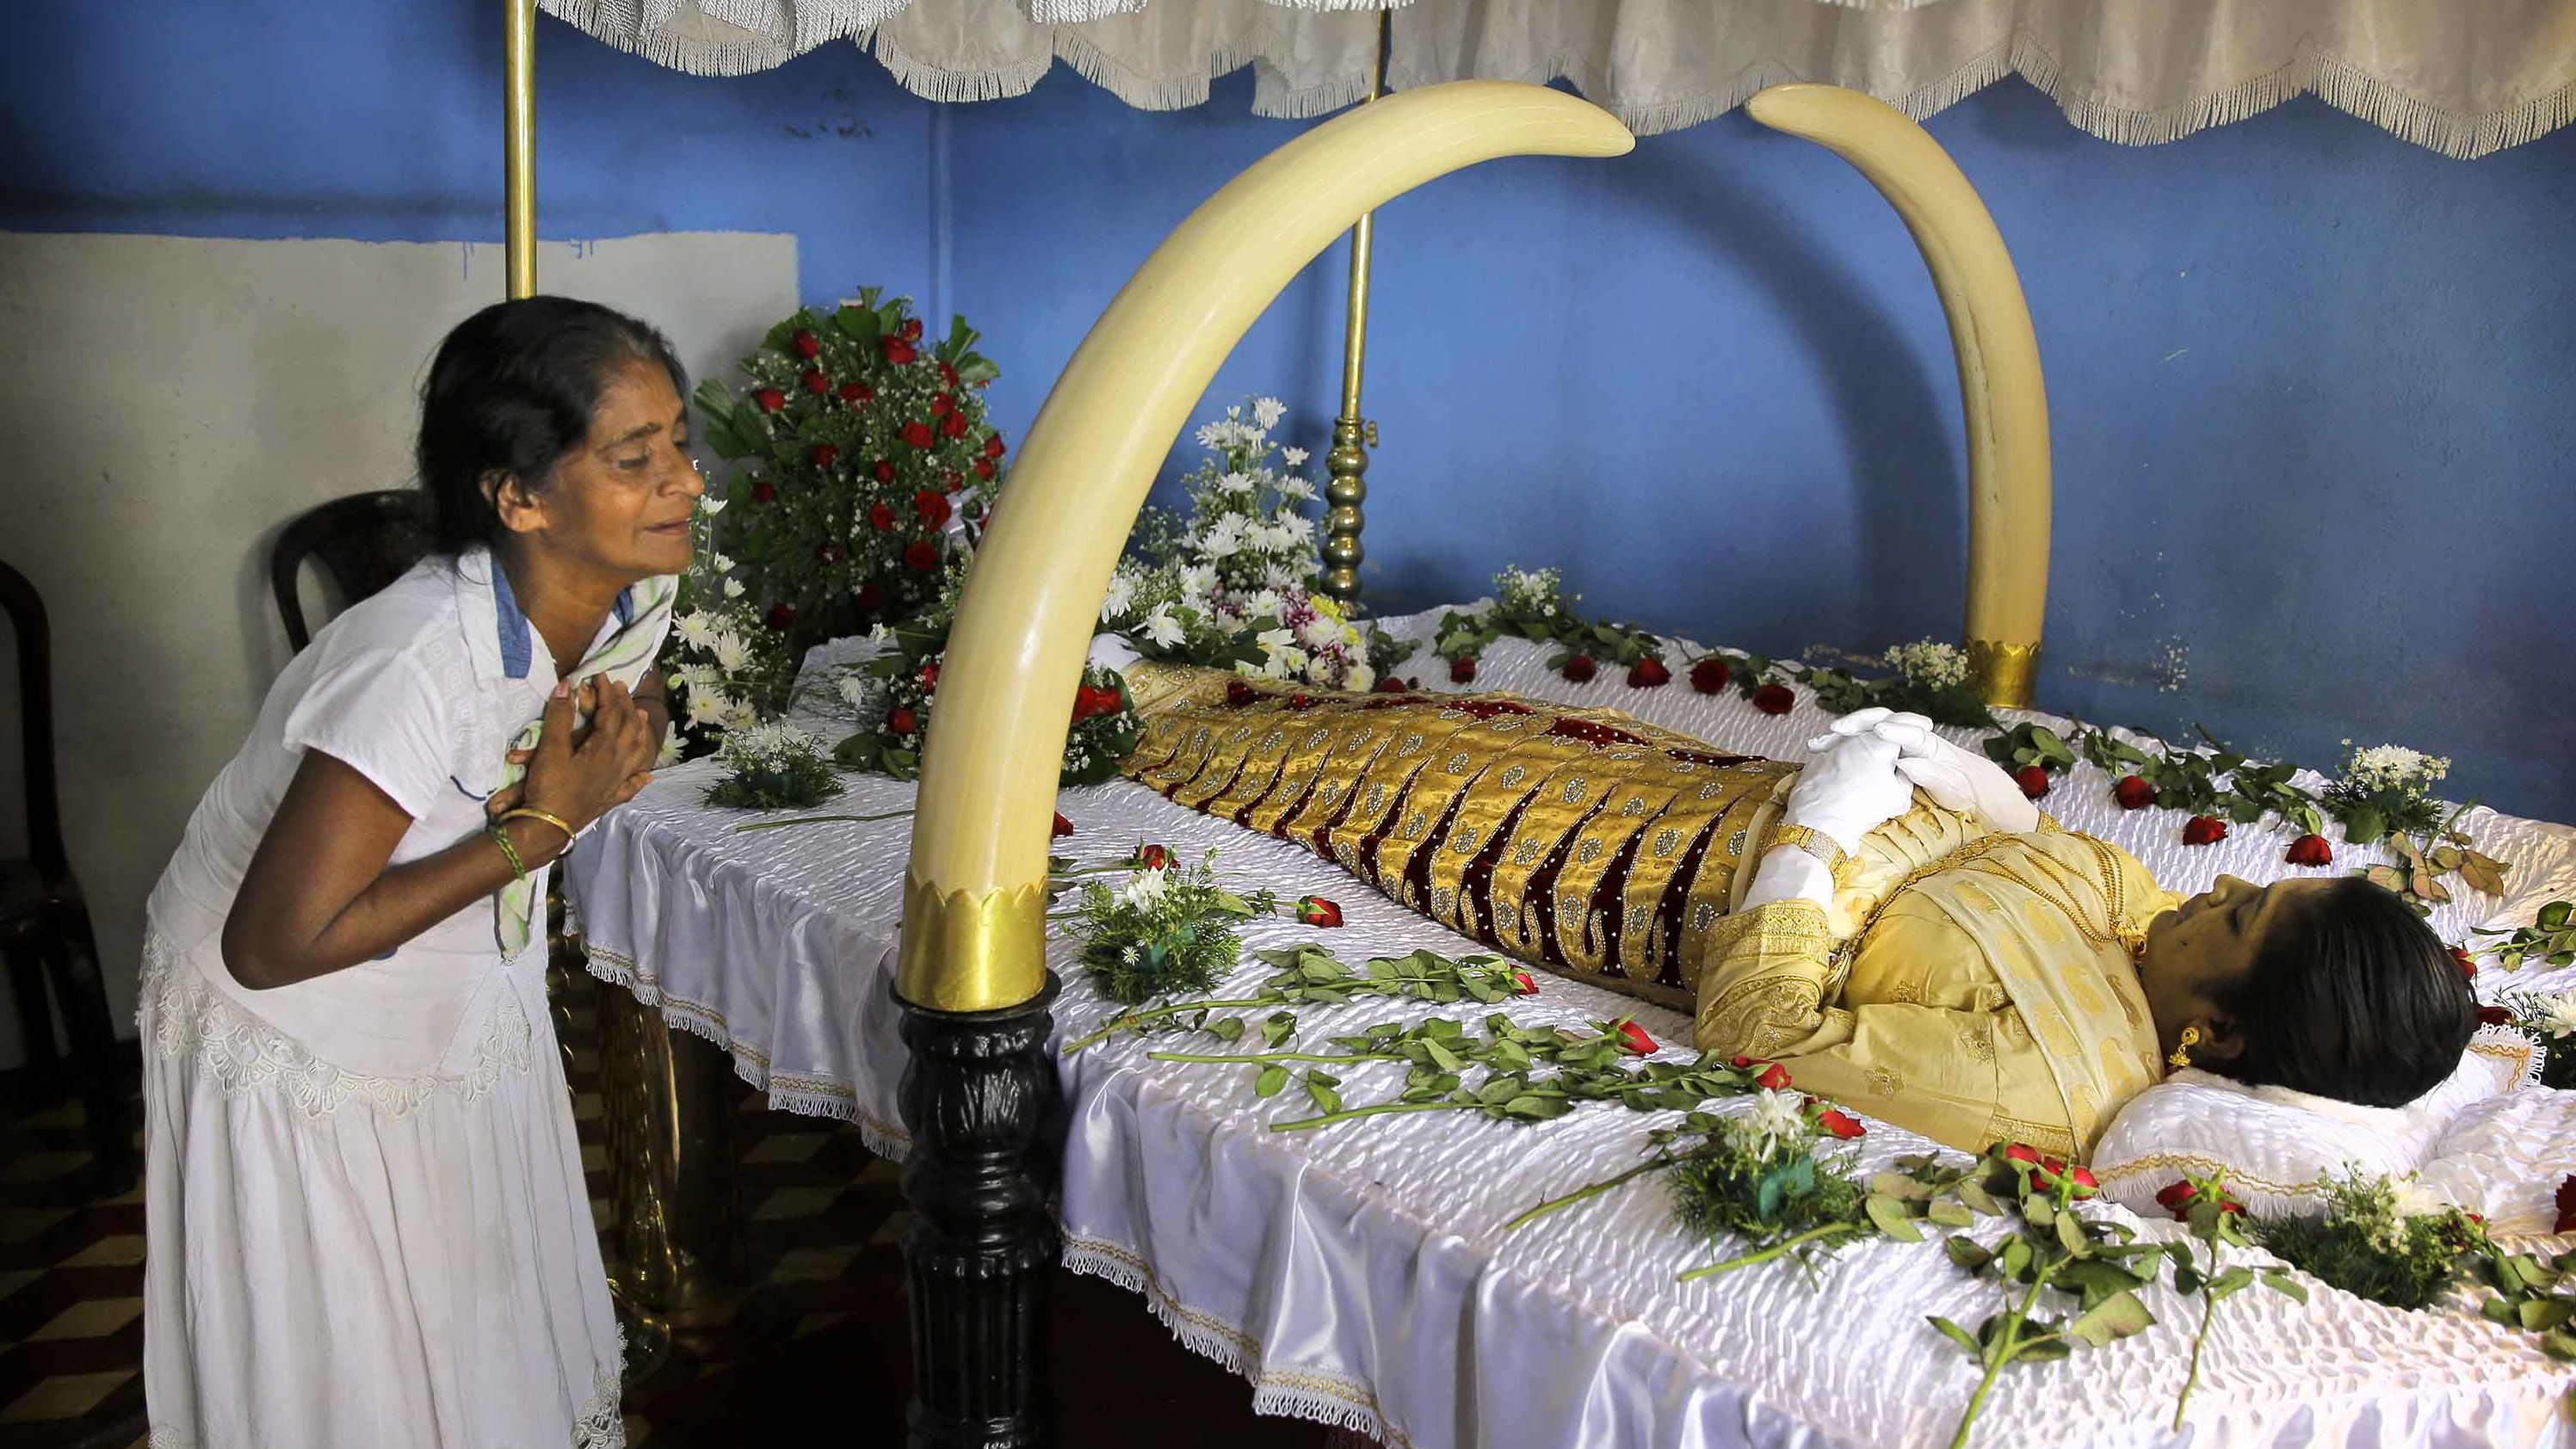 On Tuesday, April 23, Harshani Sriyani weeps over the body of her daughter who was killed in the Easter Sunday bombings in Colombo.